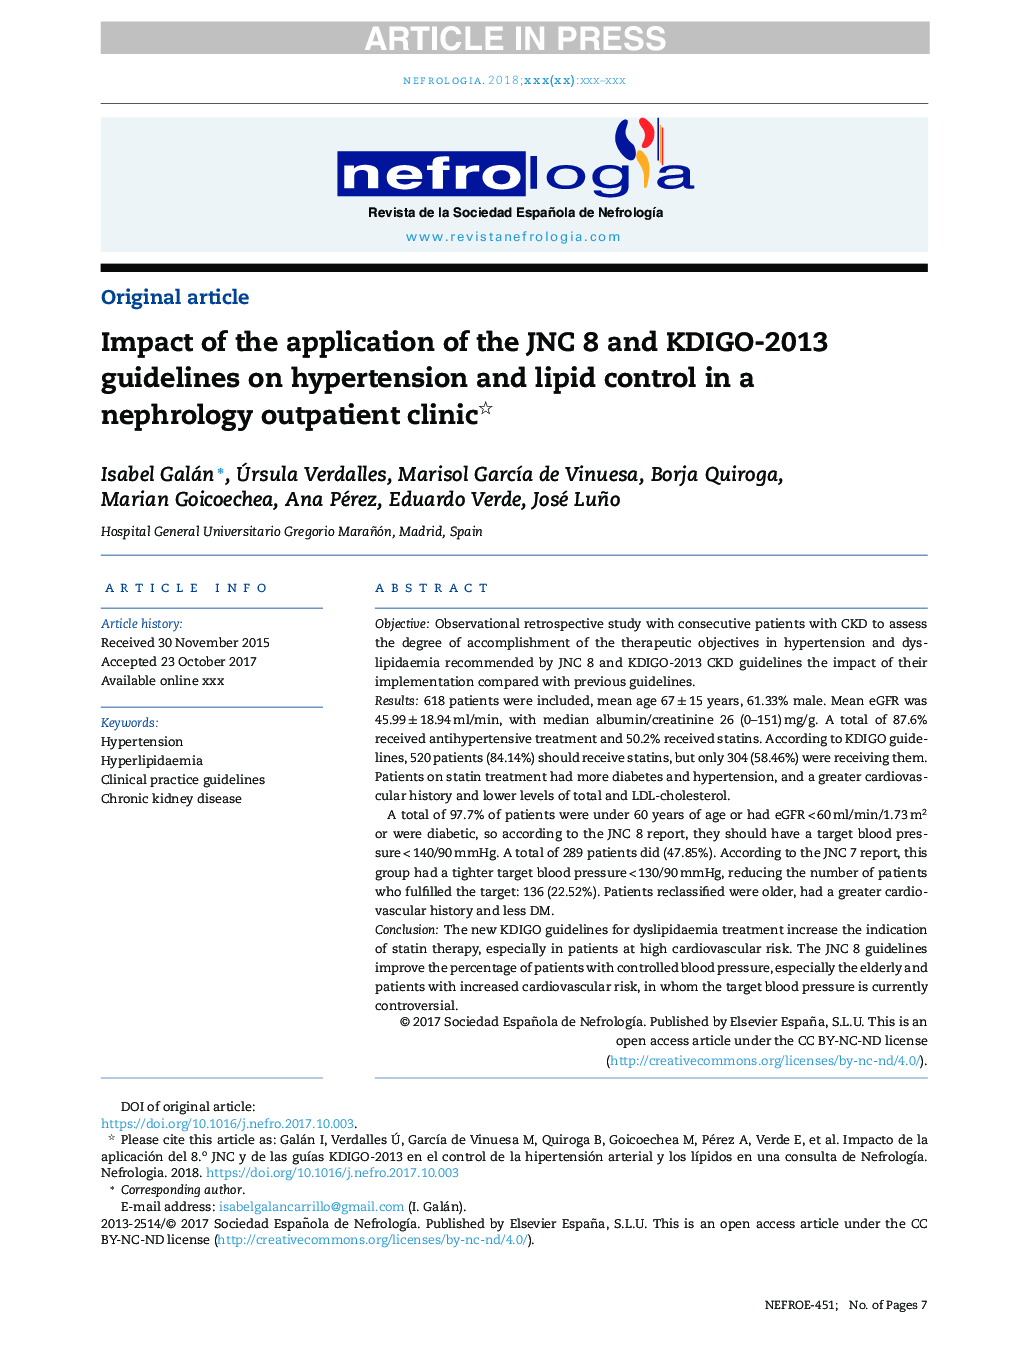 Impact of the application of the JNC 8 and KDIGO-2013 guidelines on hypertension and lipid control in a nephrology outpatient clinic